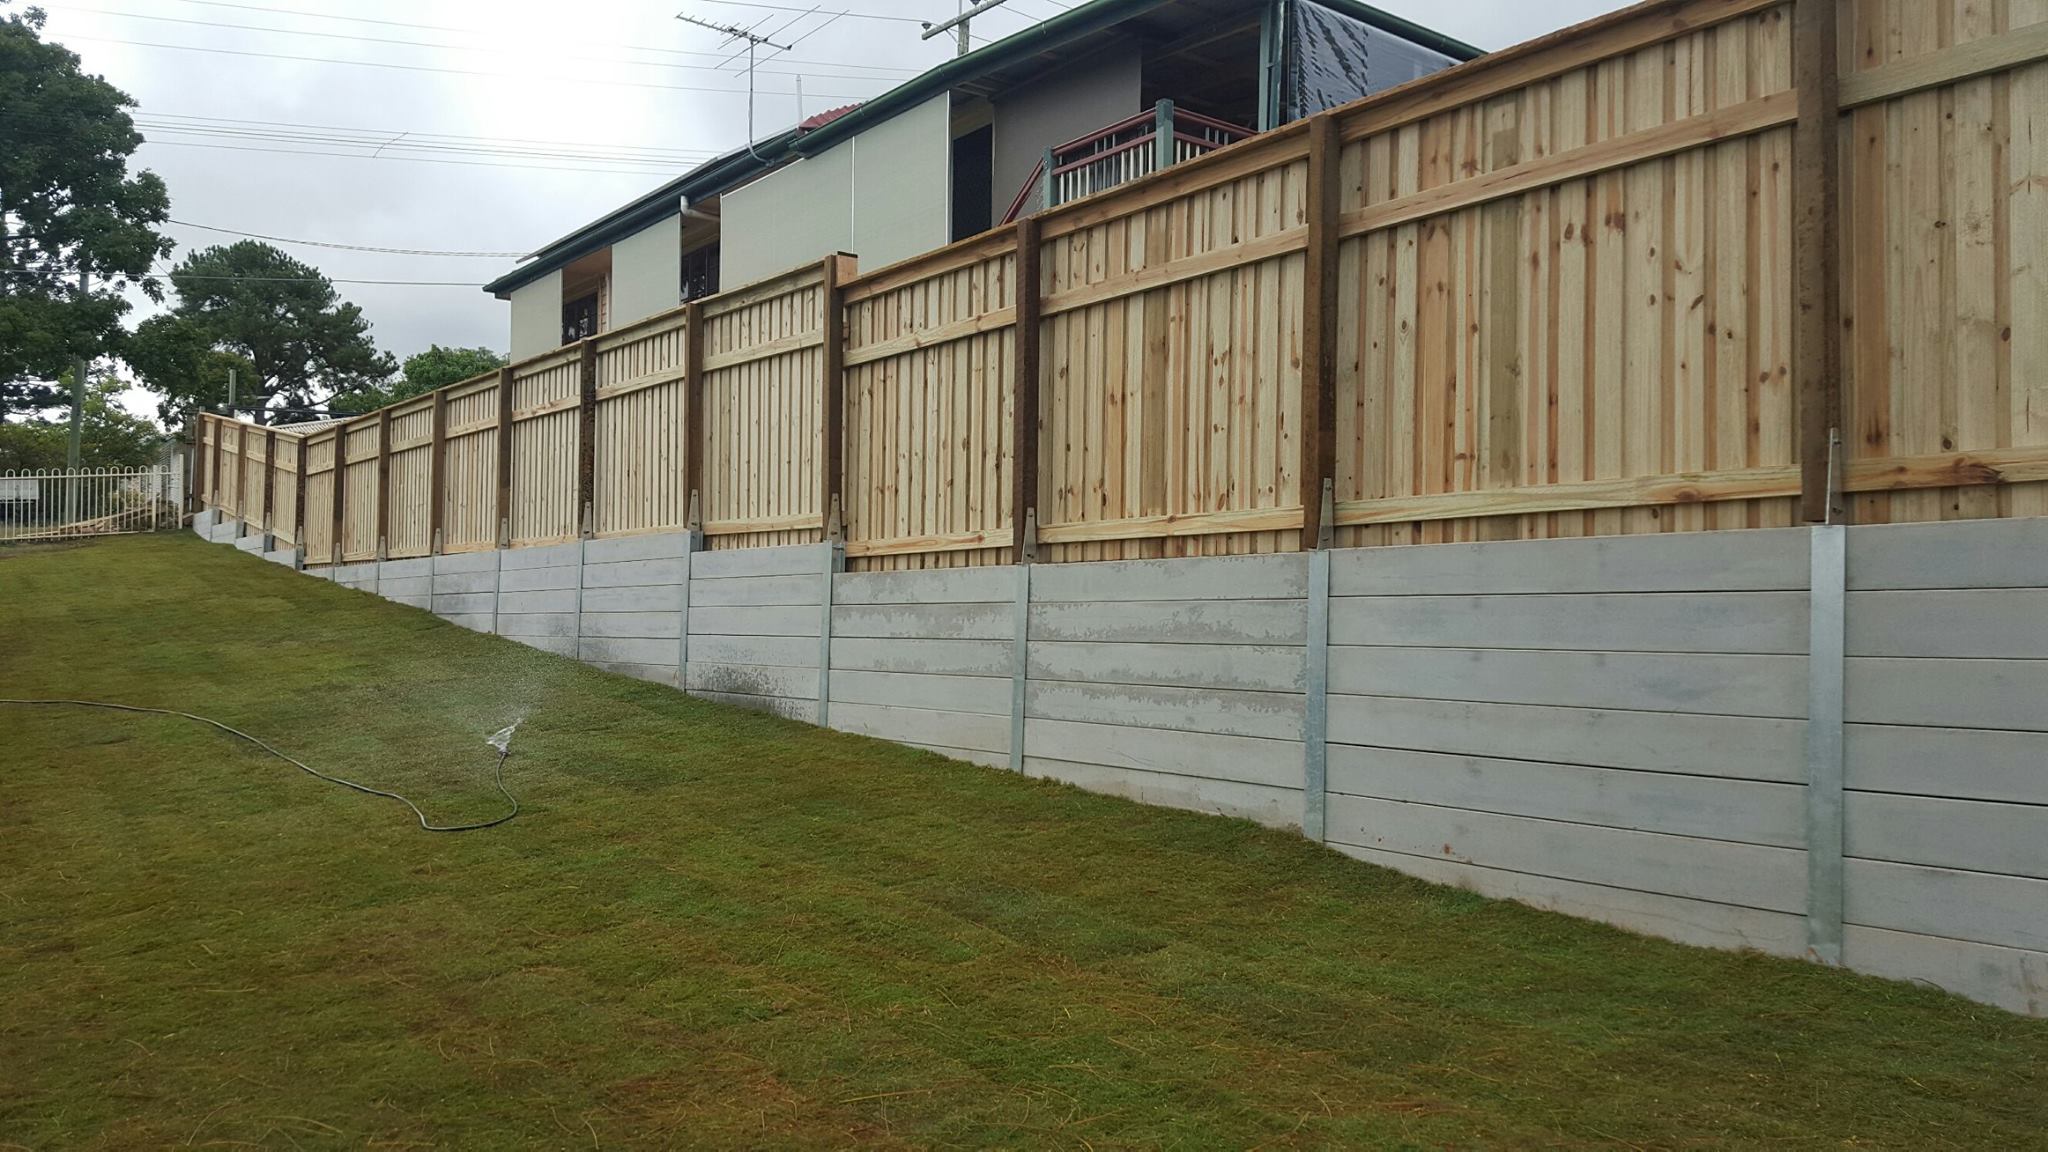 Durawall staggered retaining wall and timber fence